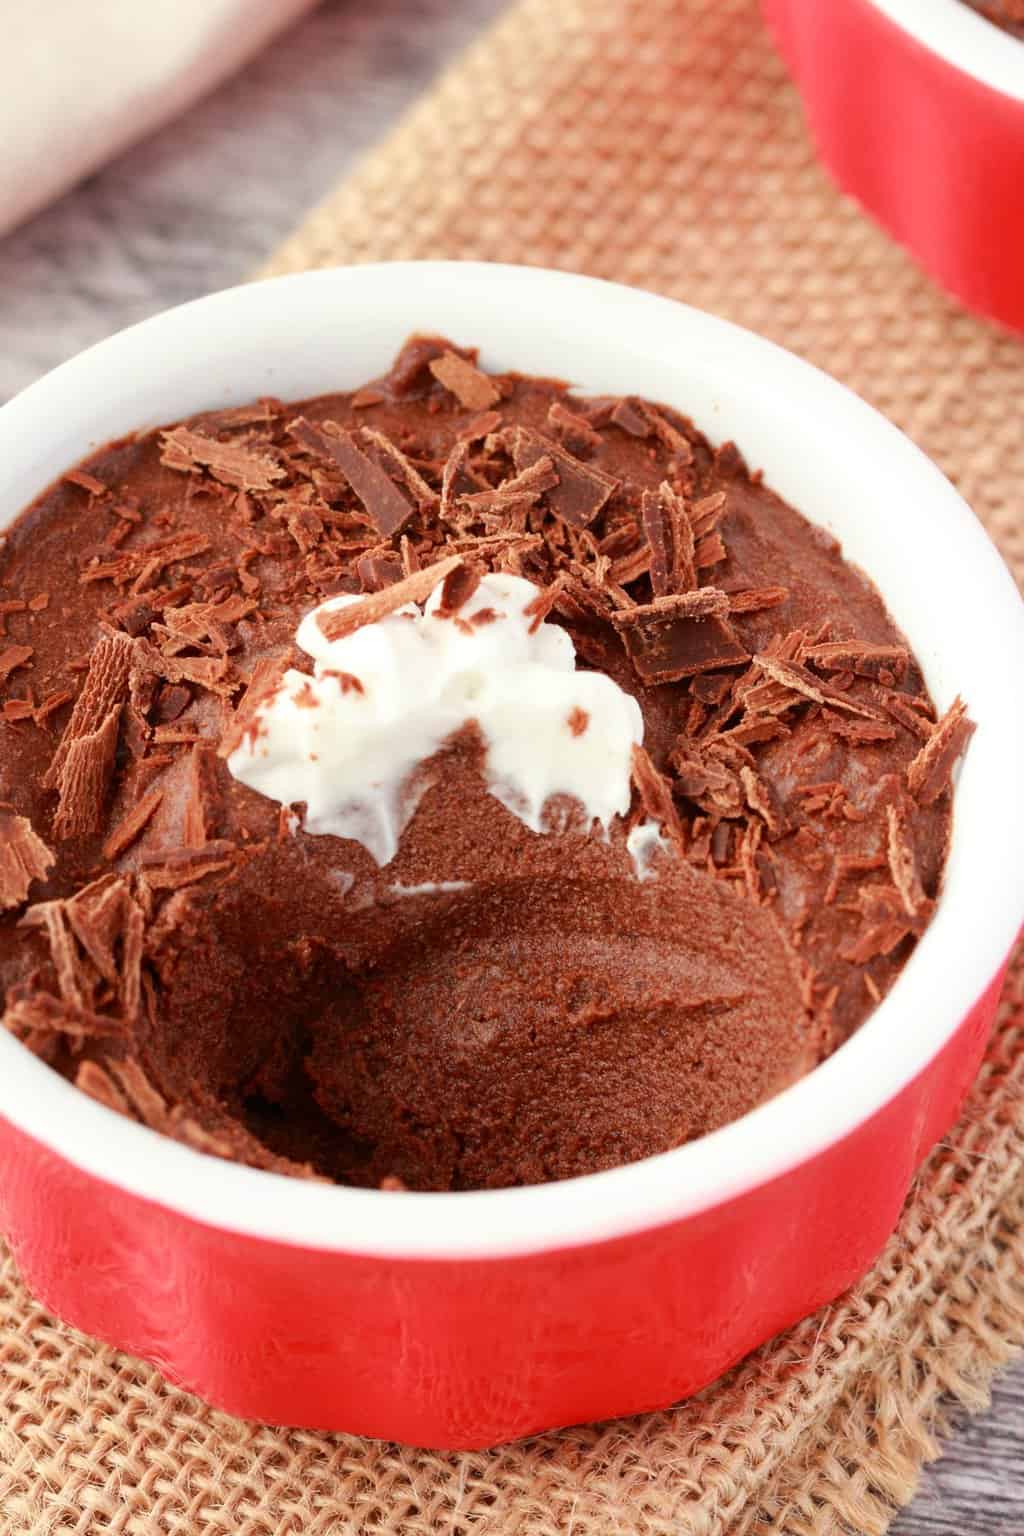 Vegan mousse topped with cream and chocolate shavings in a red and white ramekin.